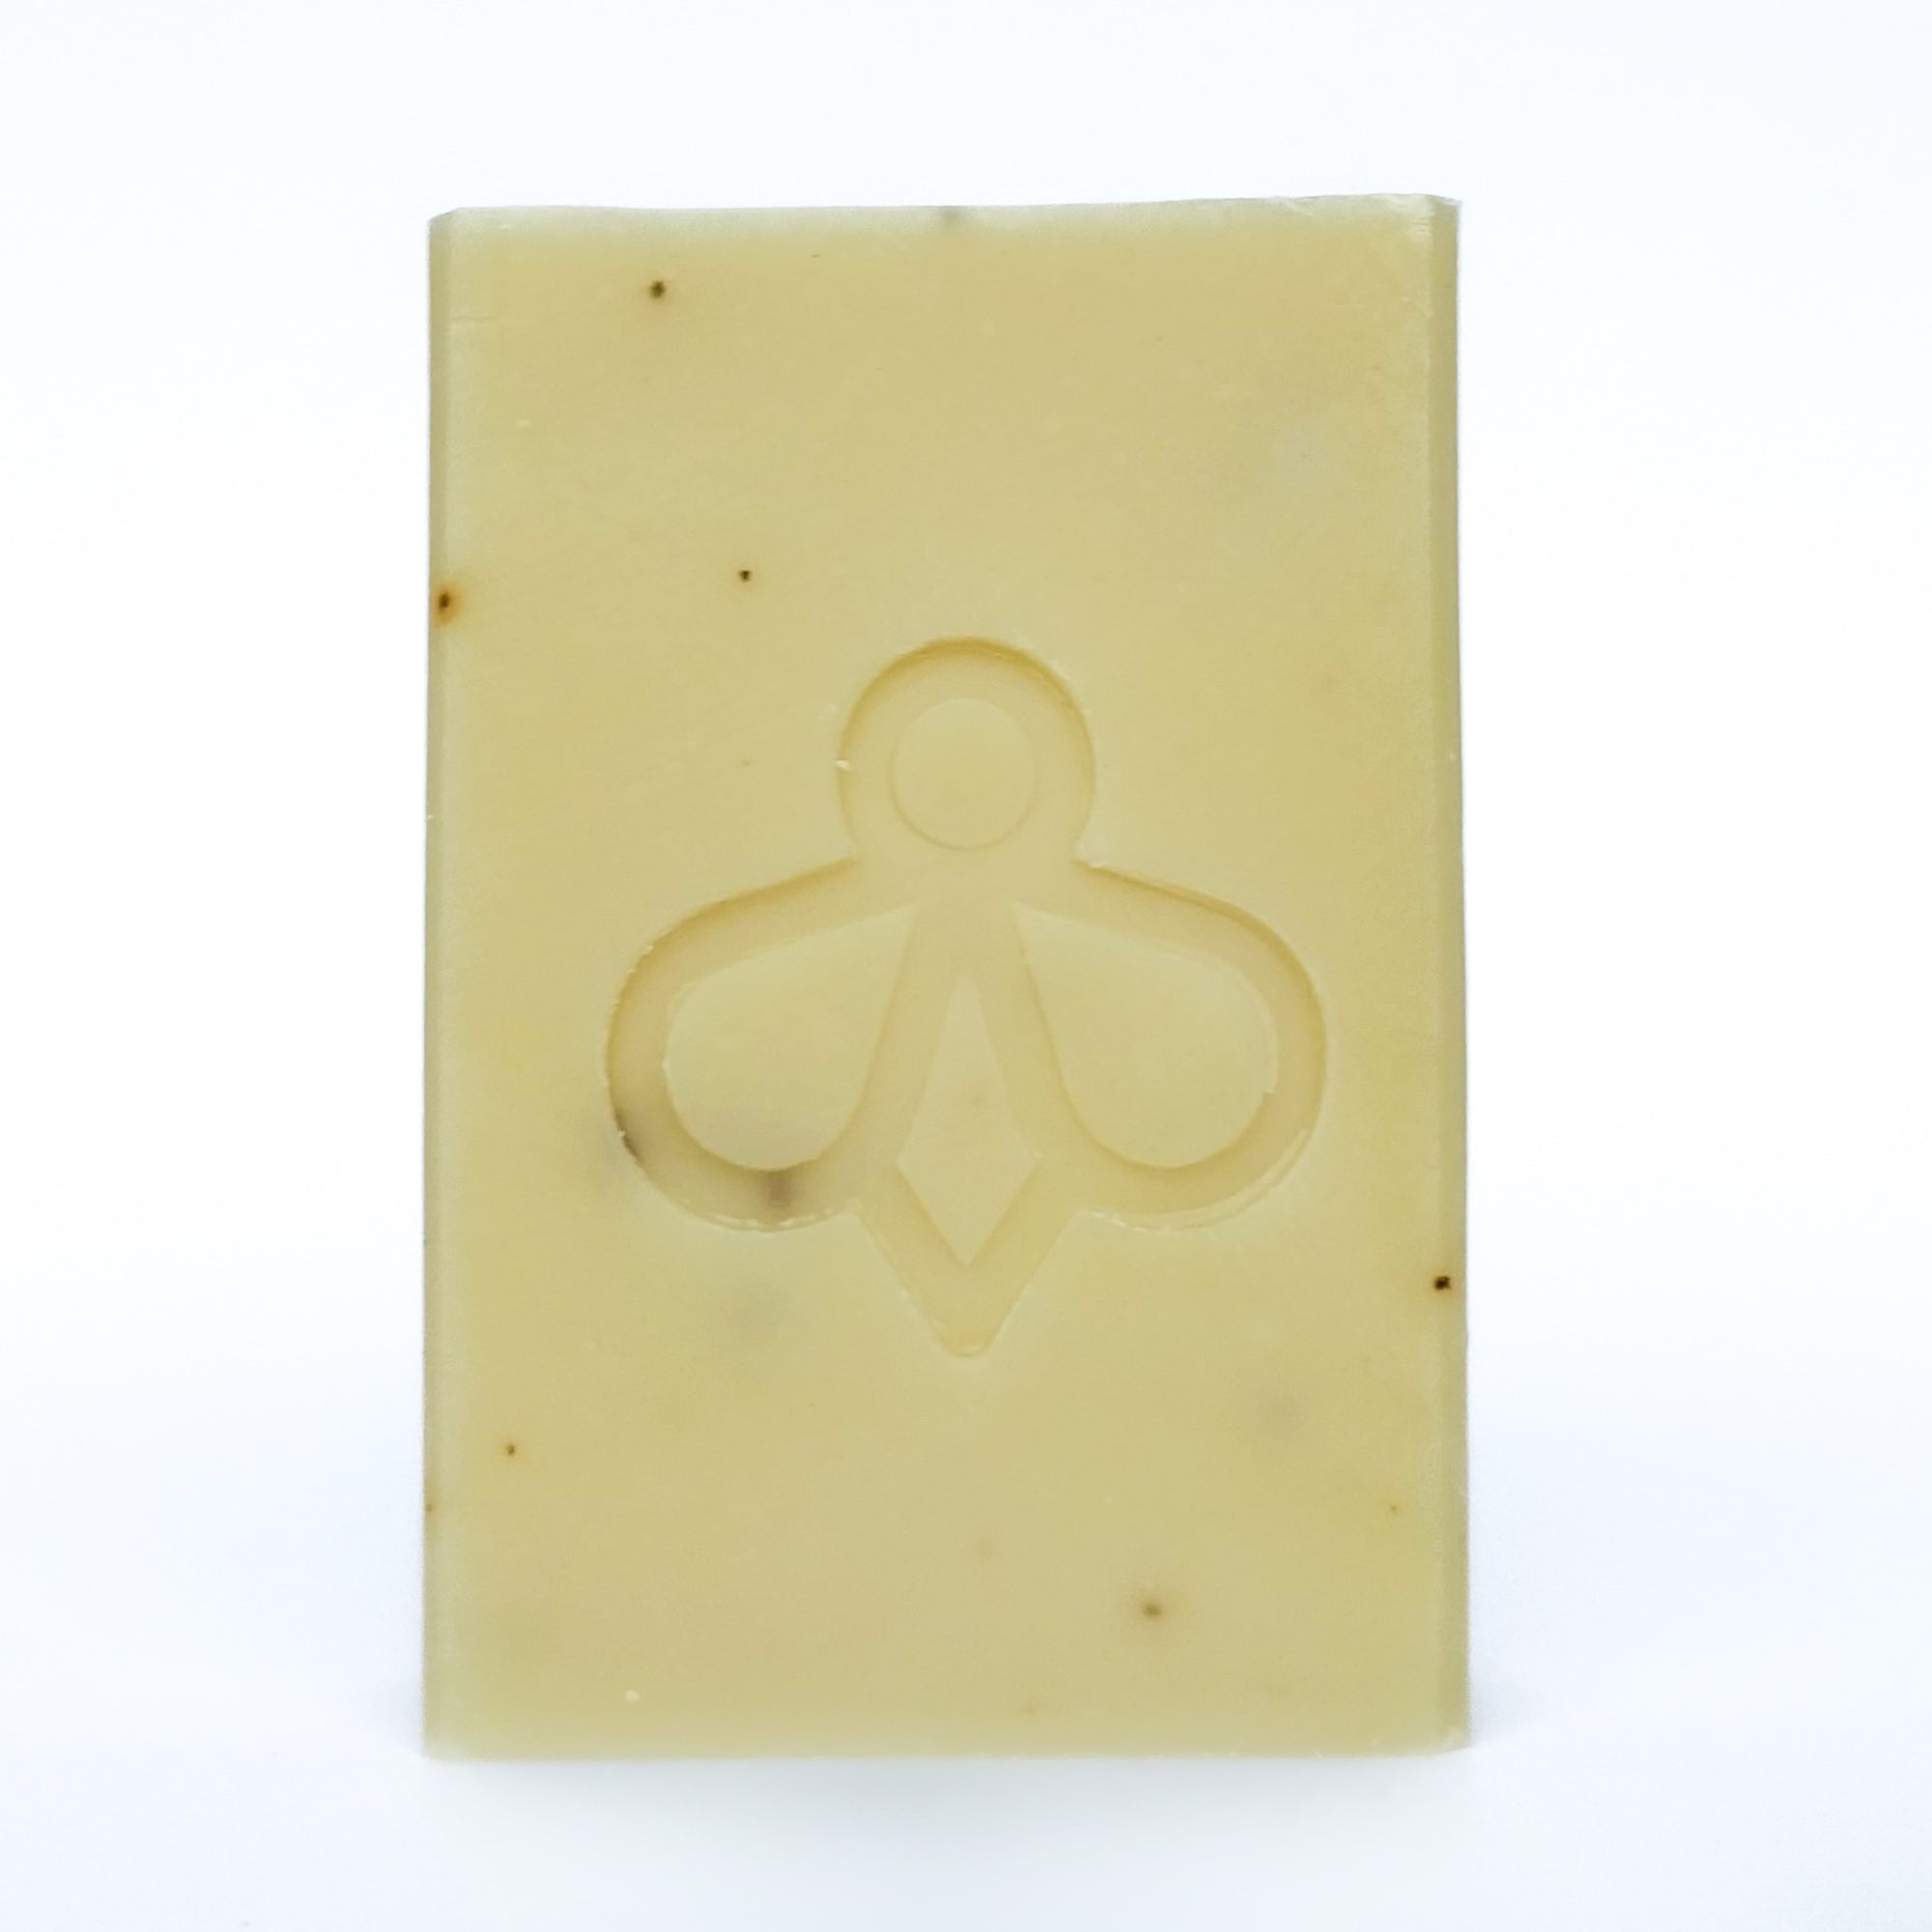 Lavender and Aloe Vera Soap - A soft white bar with black speckles, featuring our bee imprint, displayed against a clean white background. Immerse yourself in the soothing aroma of lavender.